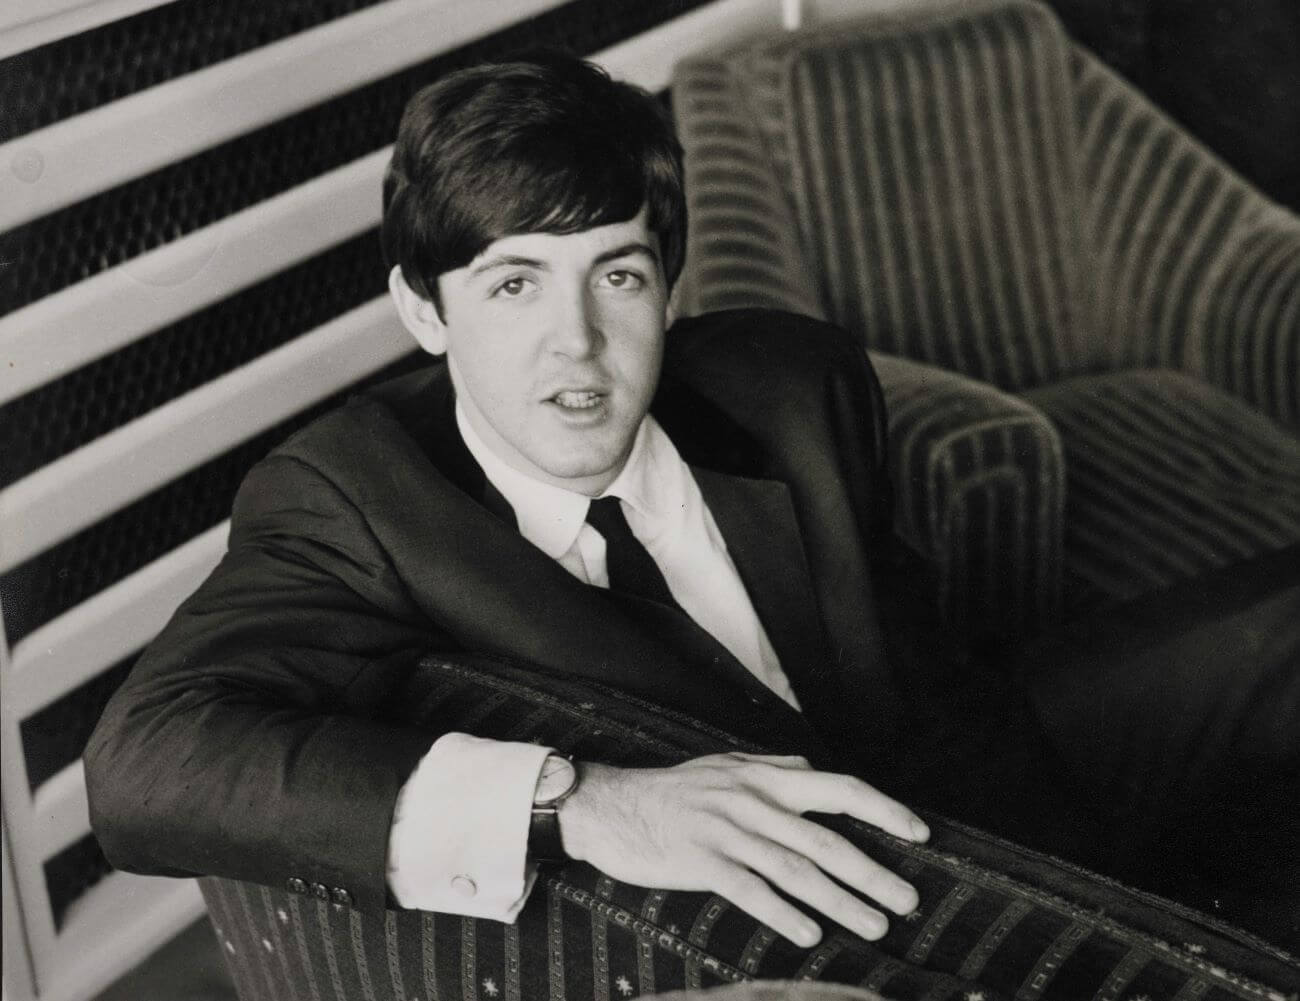 A black and white picture of Paul McCartney wearing a suit and sitting on a couch.